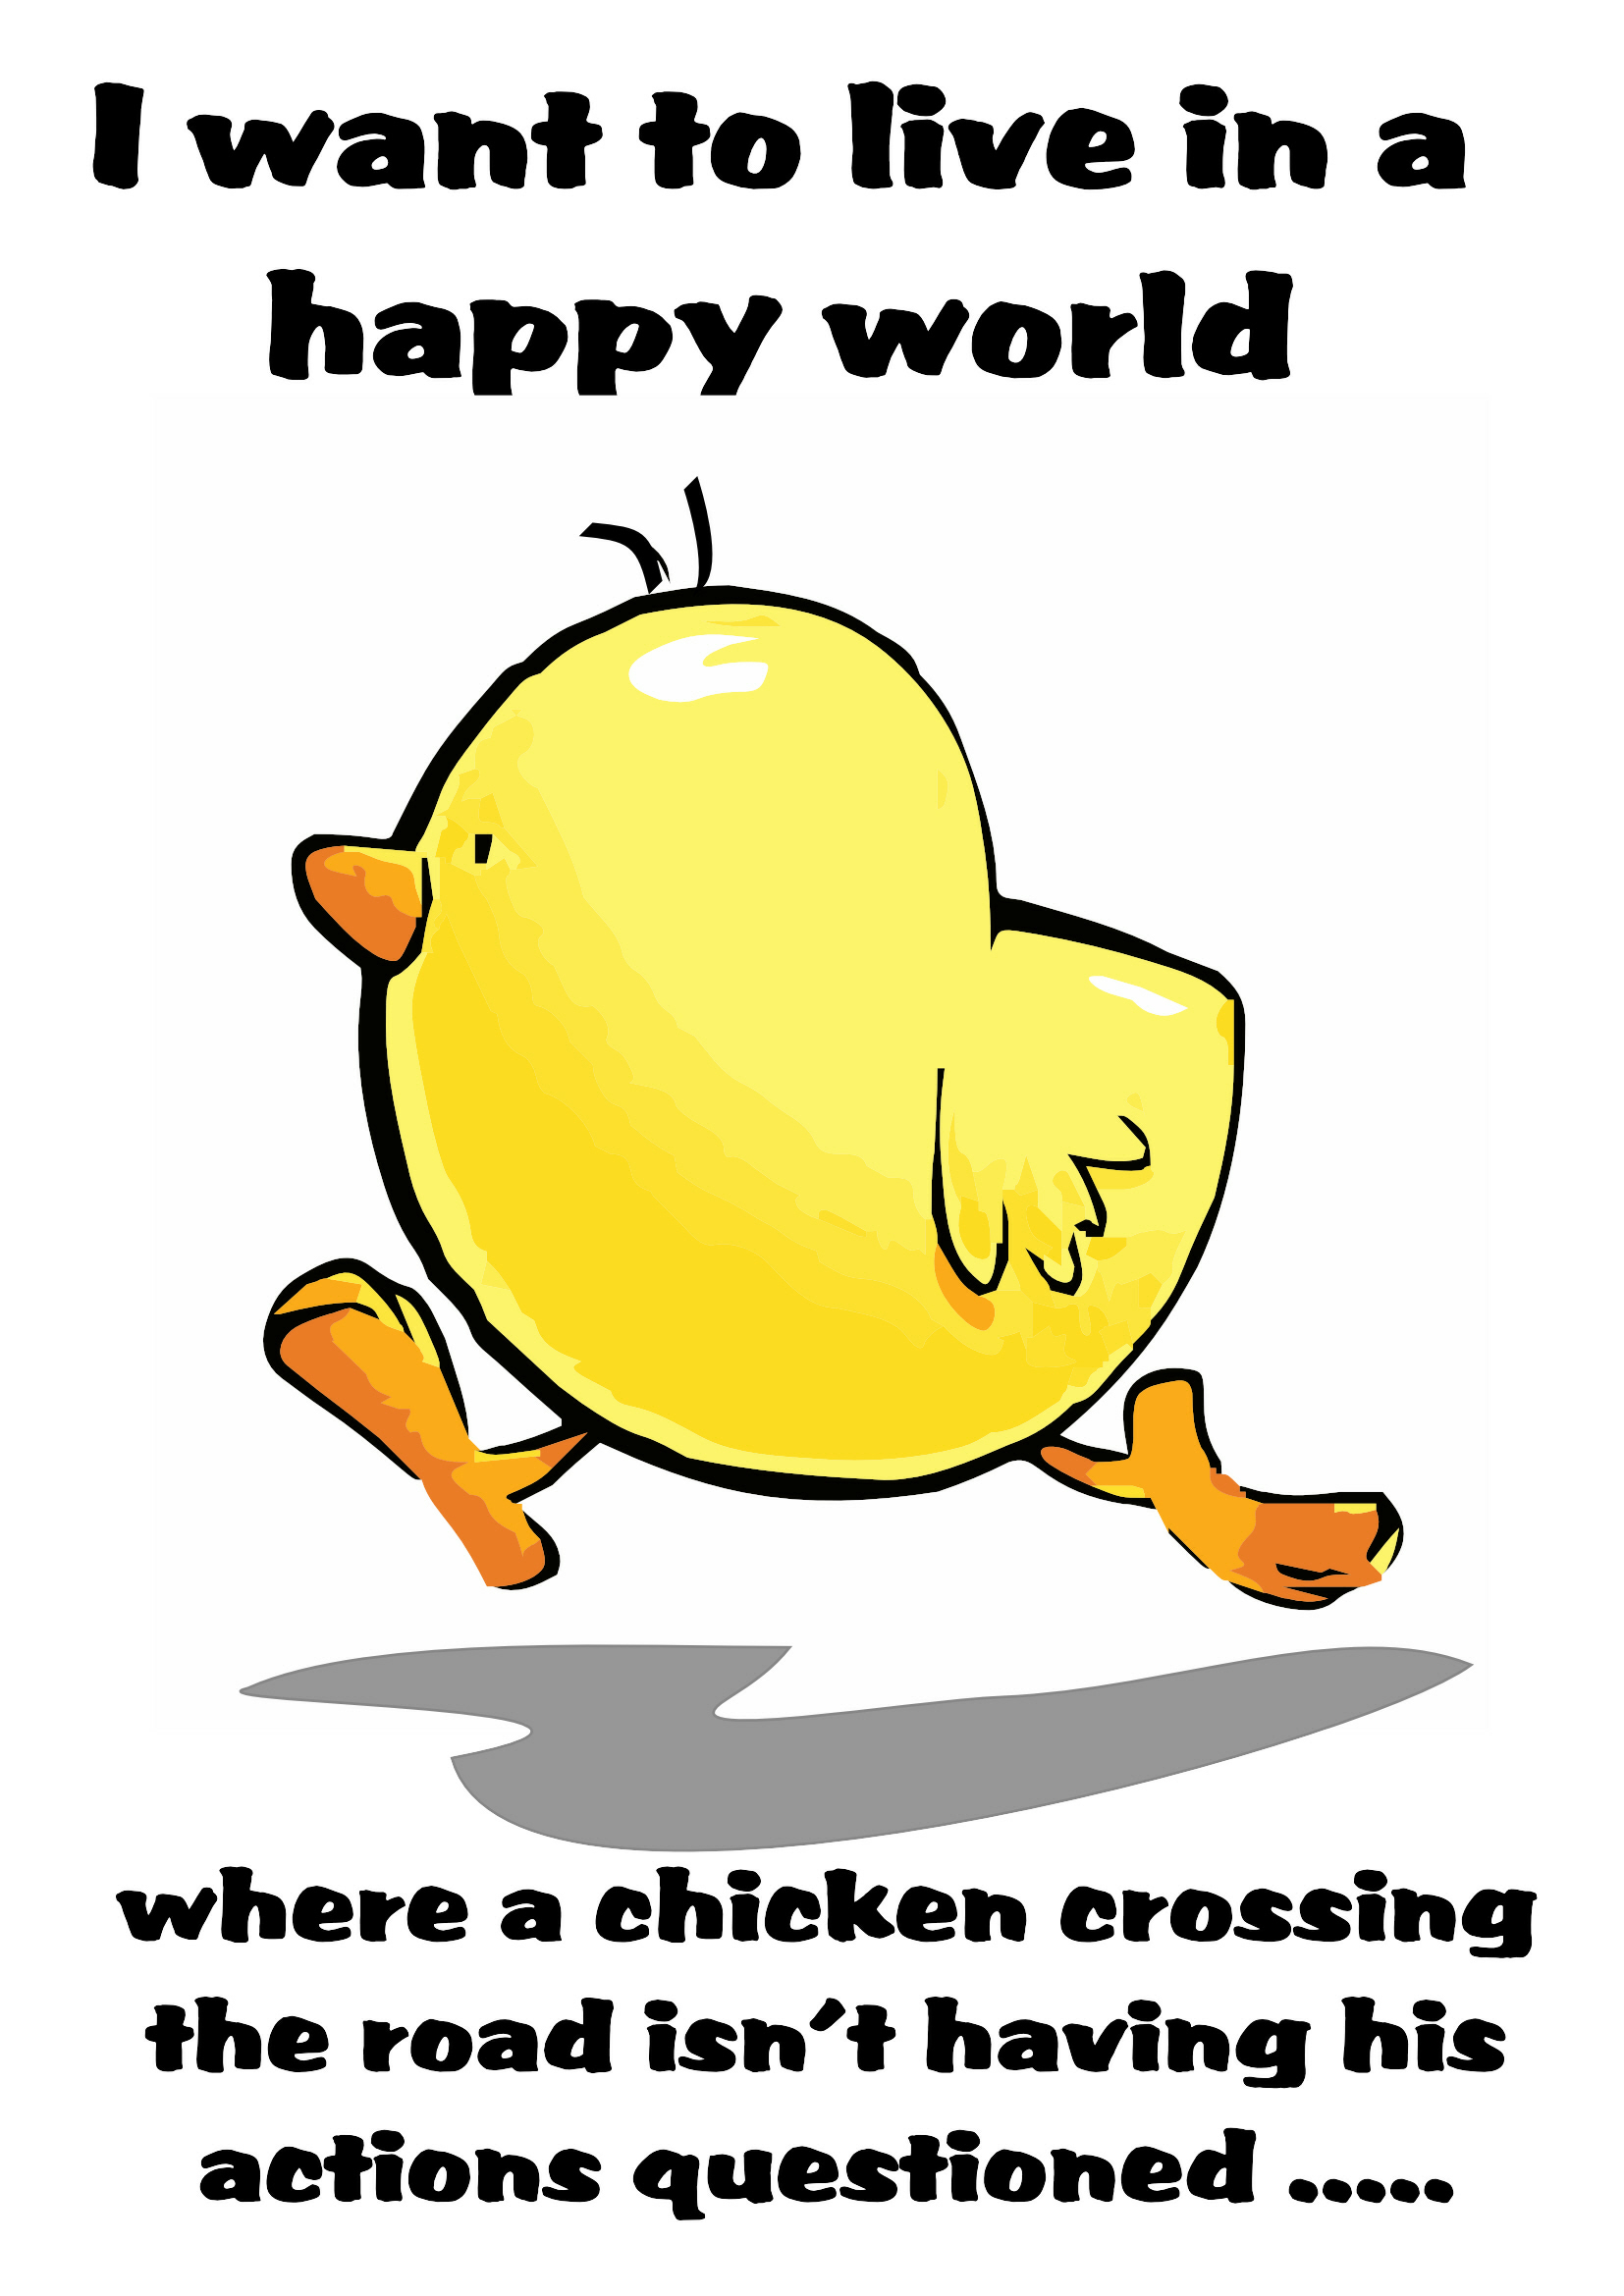 I want to live in a happy world where a chicken crossing the road isn't having his actions questioned